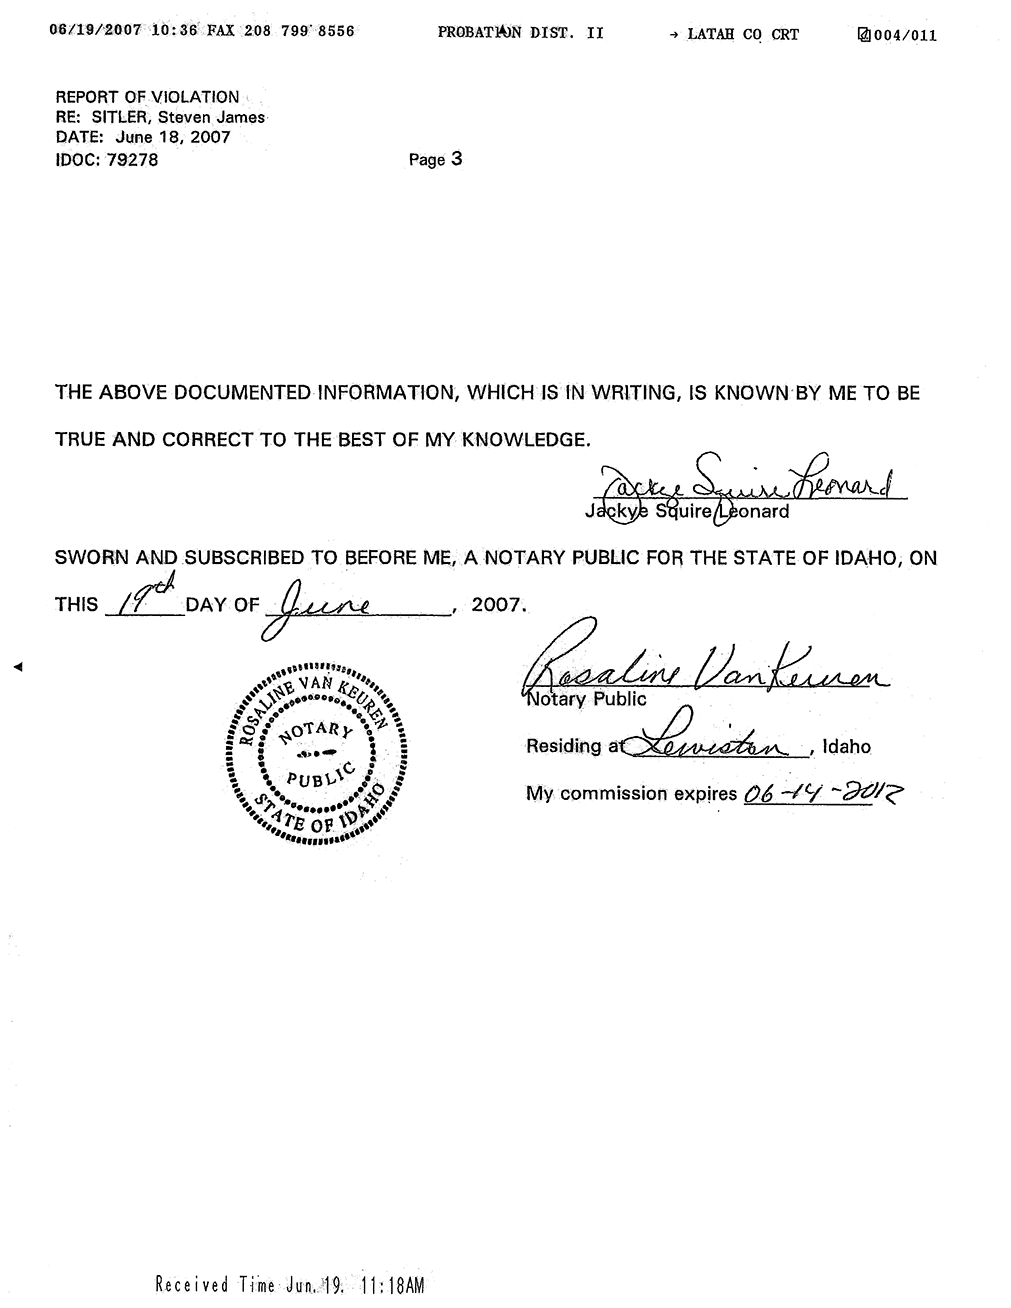 Report of Probation Violation page 3